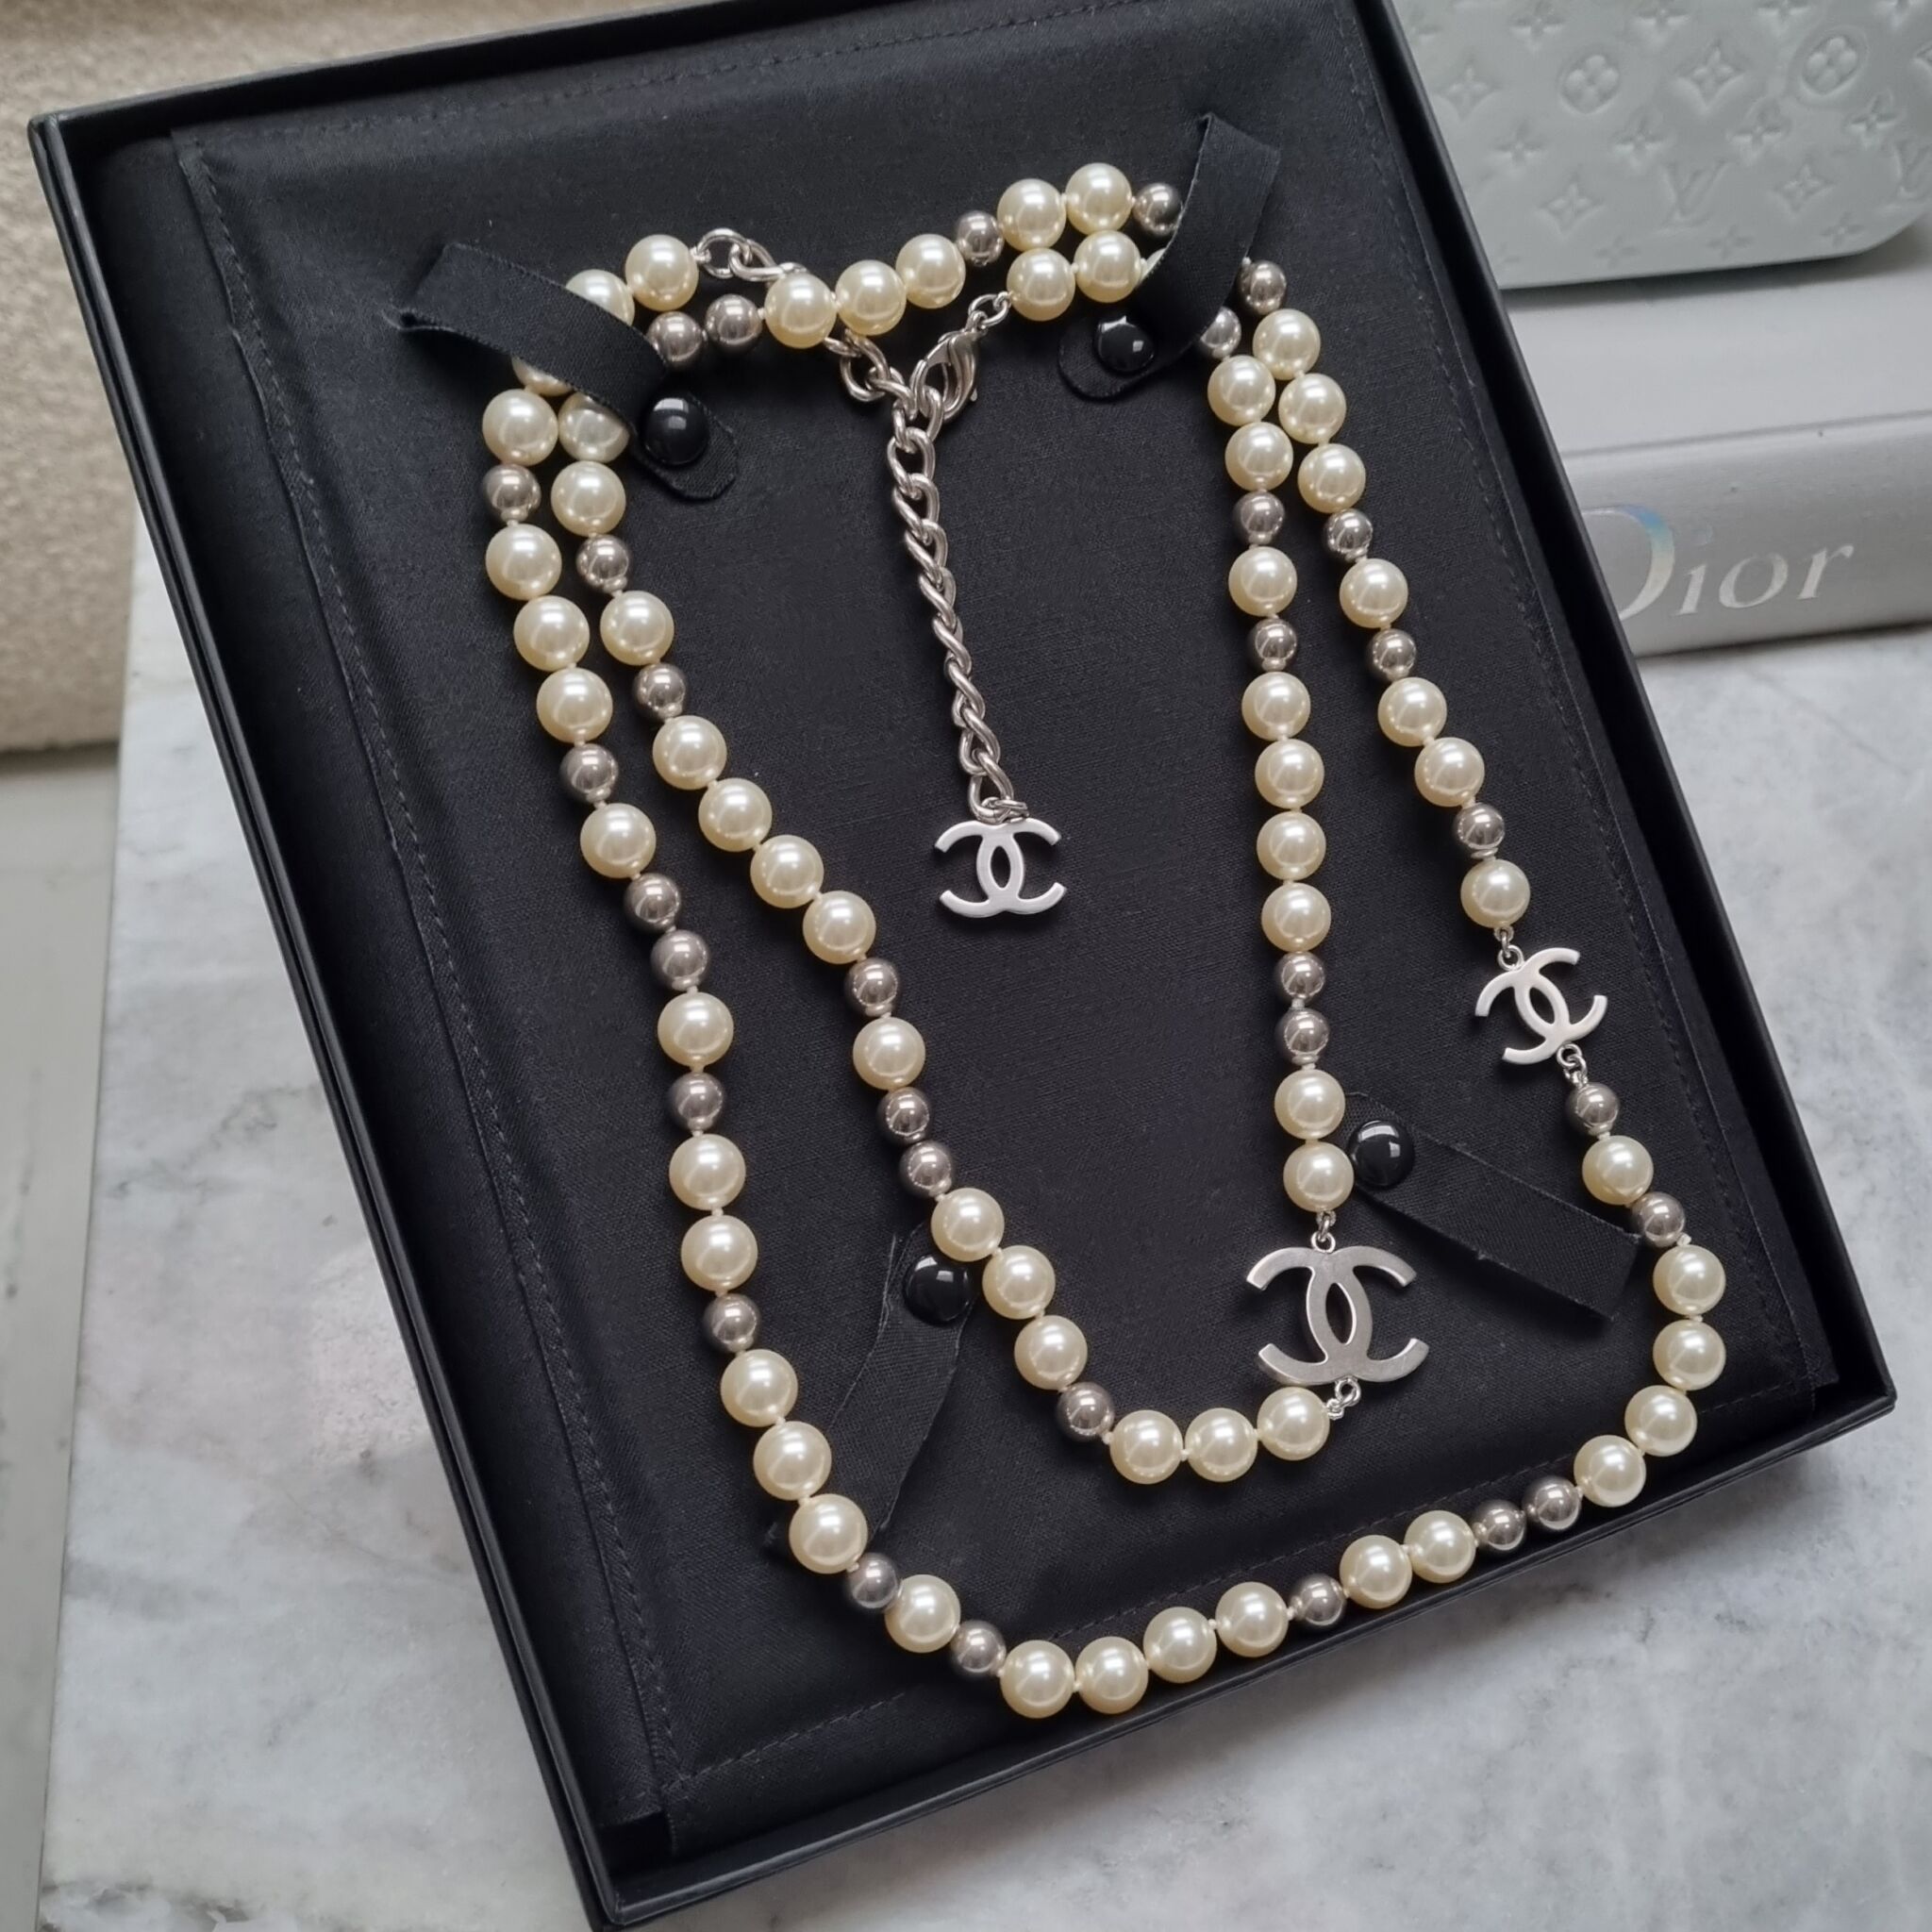 CHANEL  Jewelry  Chanel Authentic Reworked Silver Pearl Necklace   Poshmark